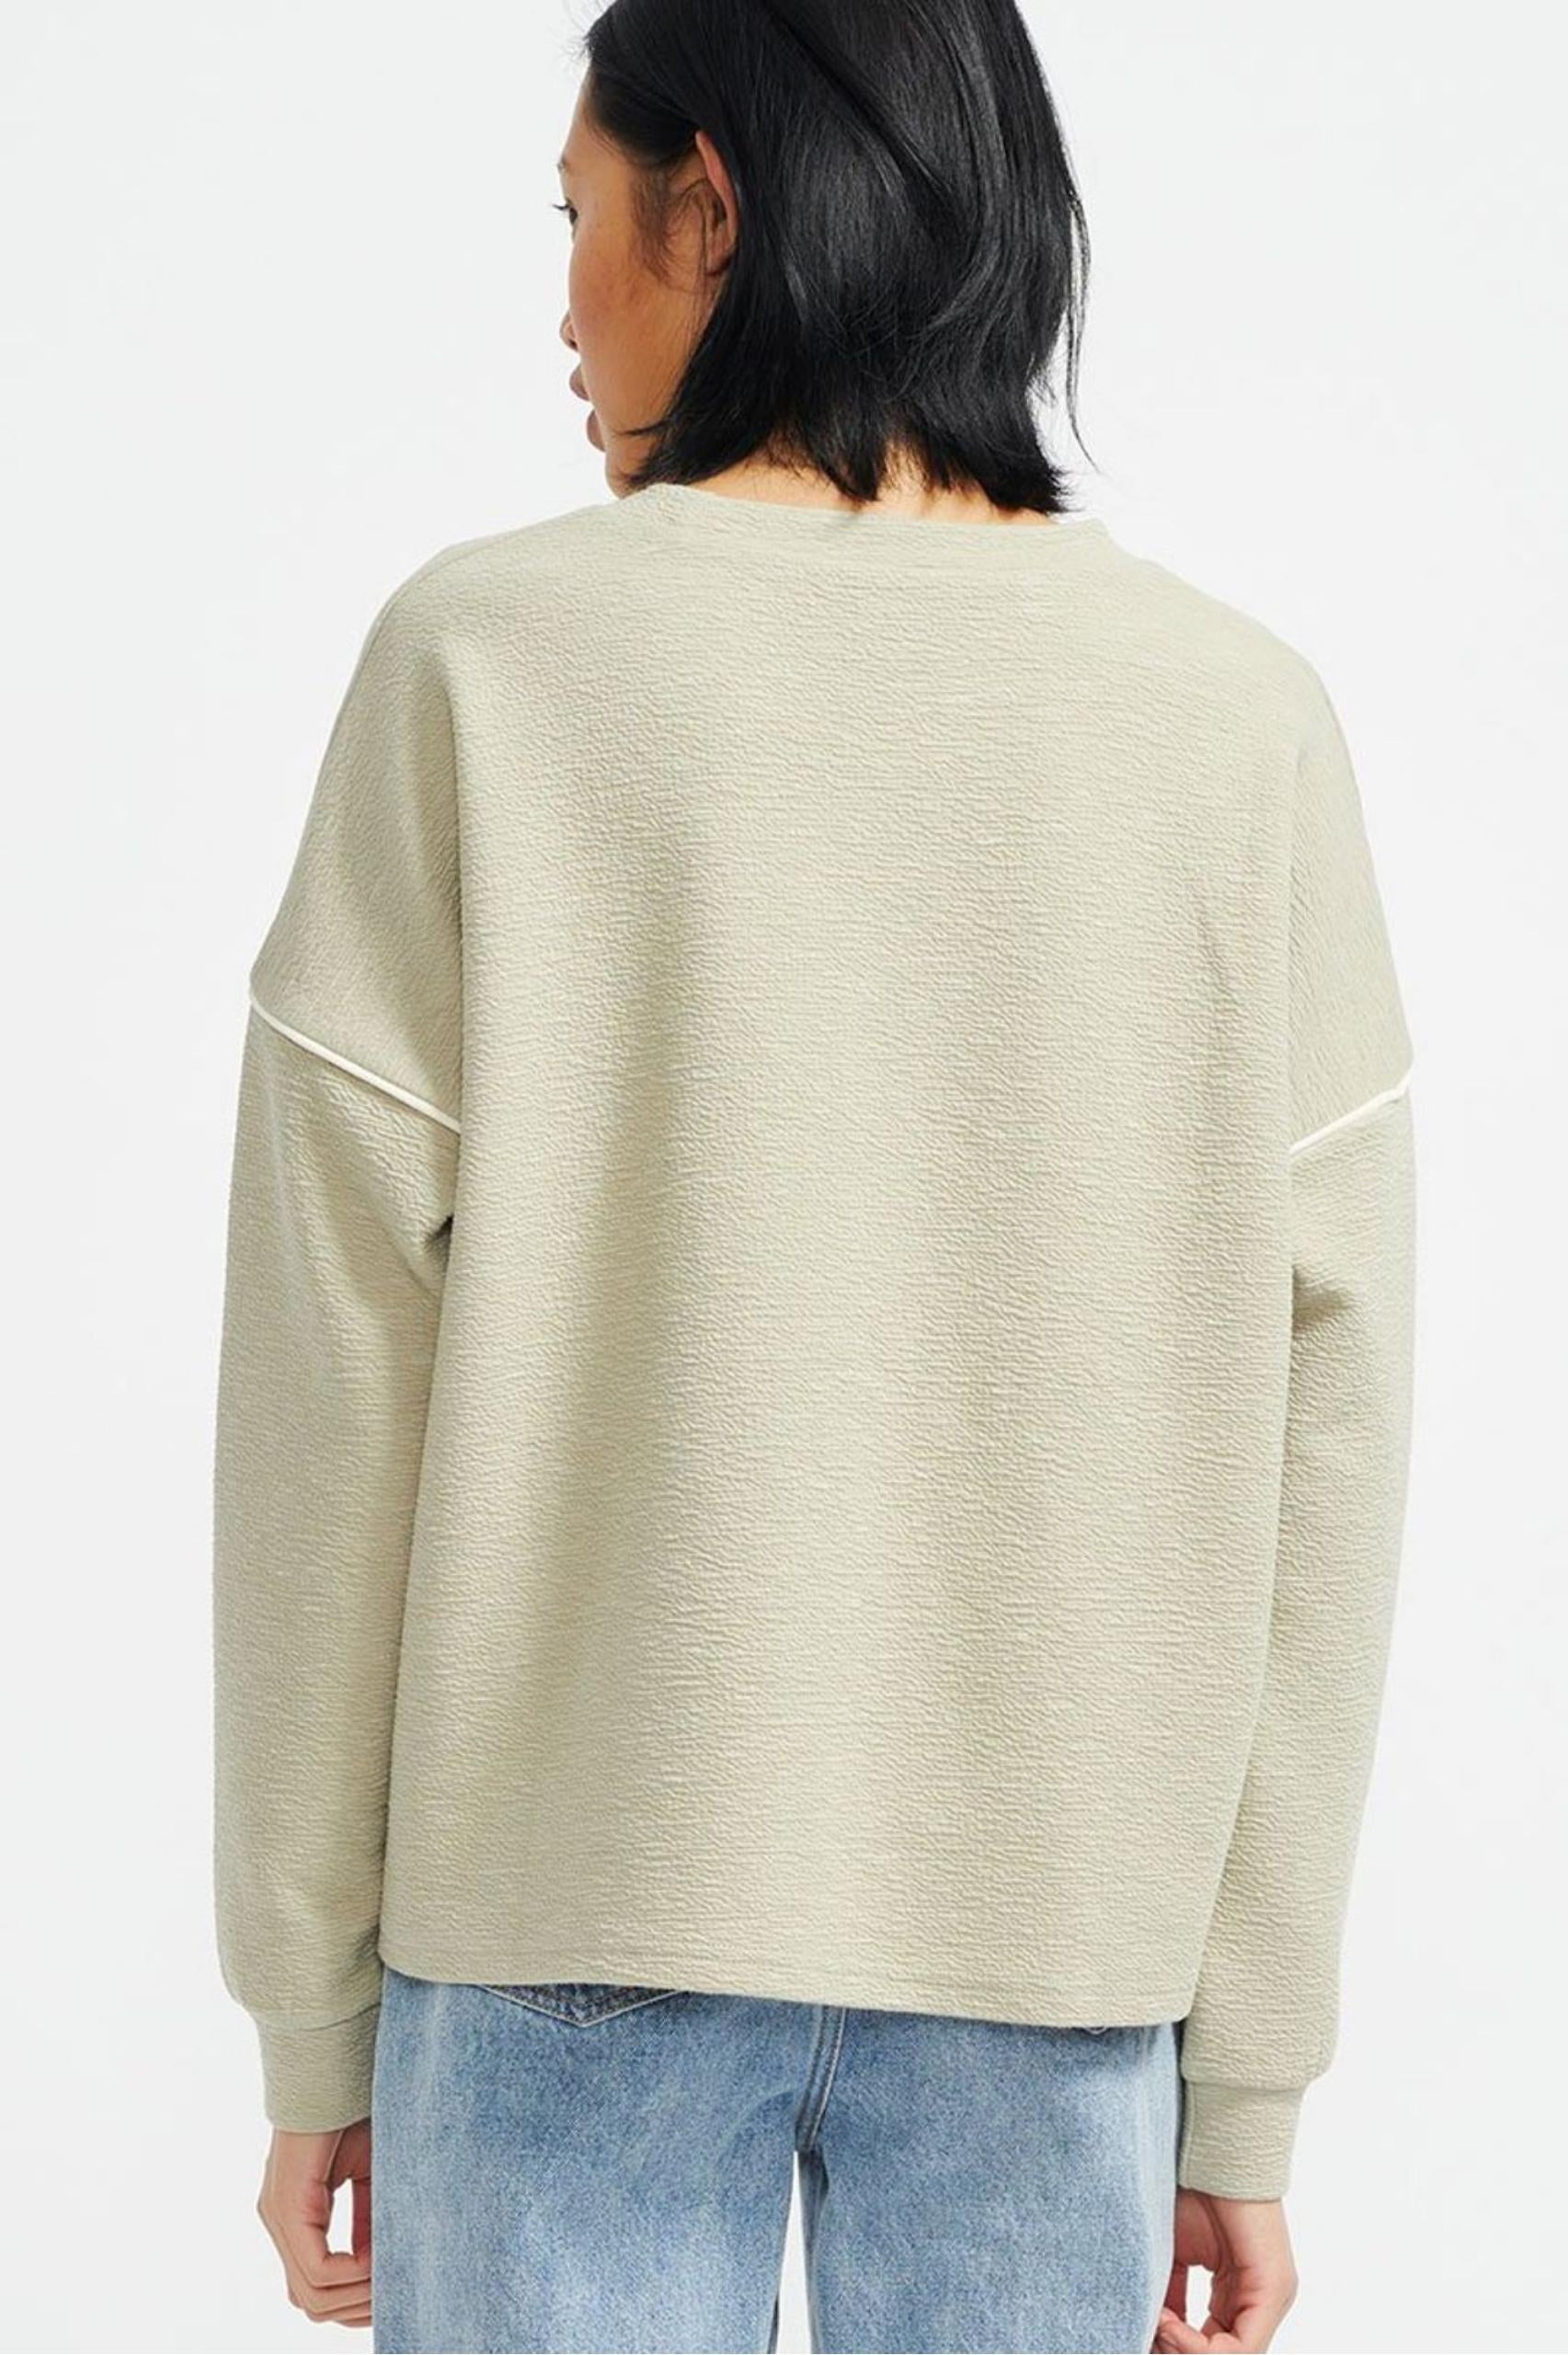 Staple The Label - Bayley Sweater